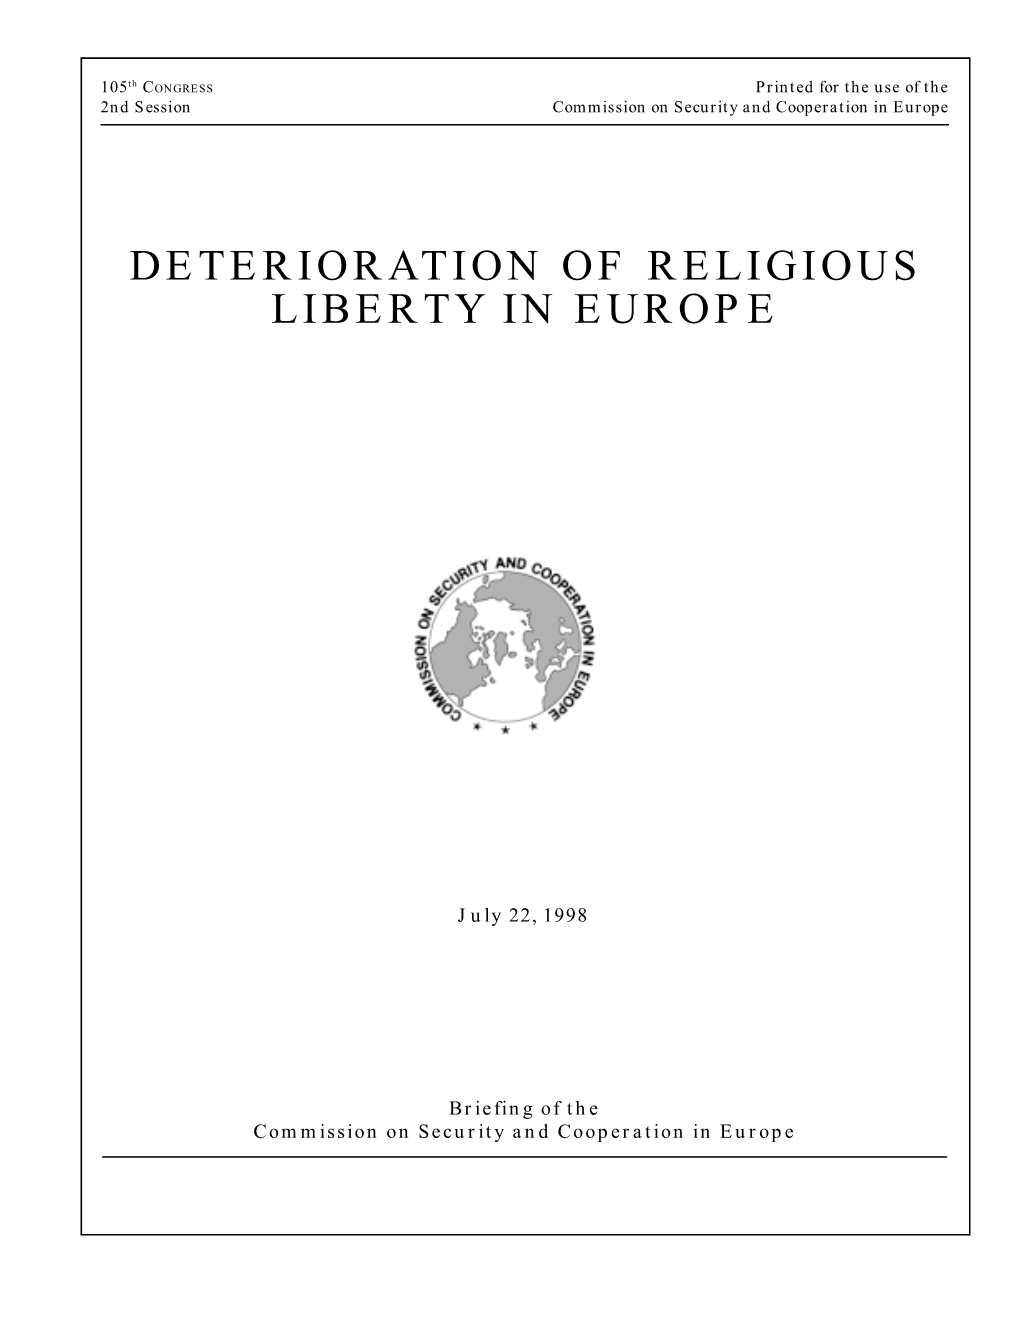 Deterioration of Religious Liberty in Europe